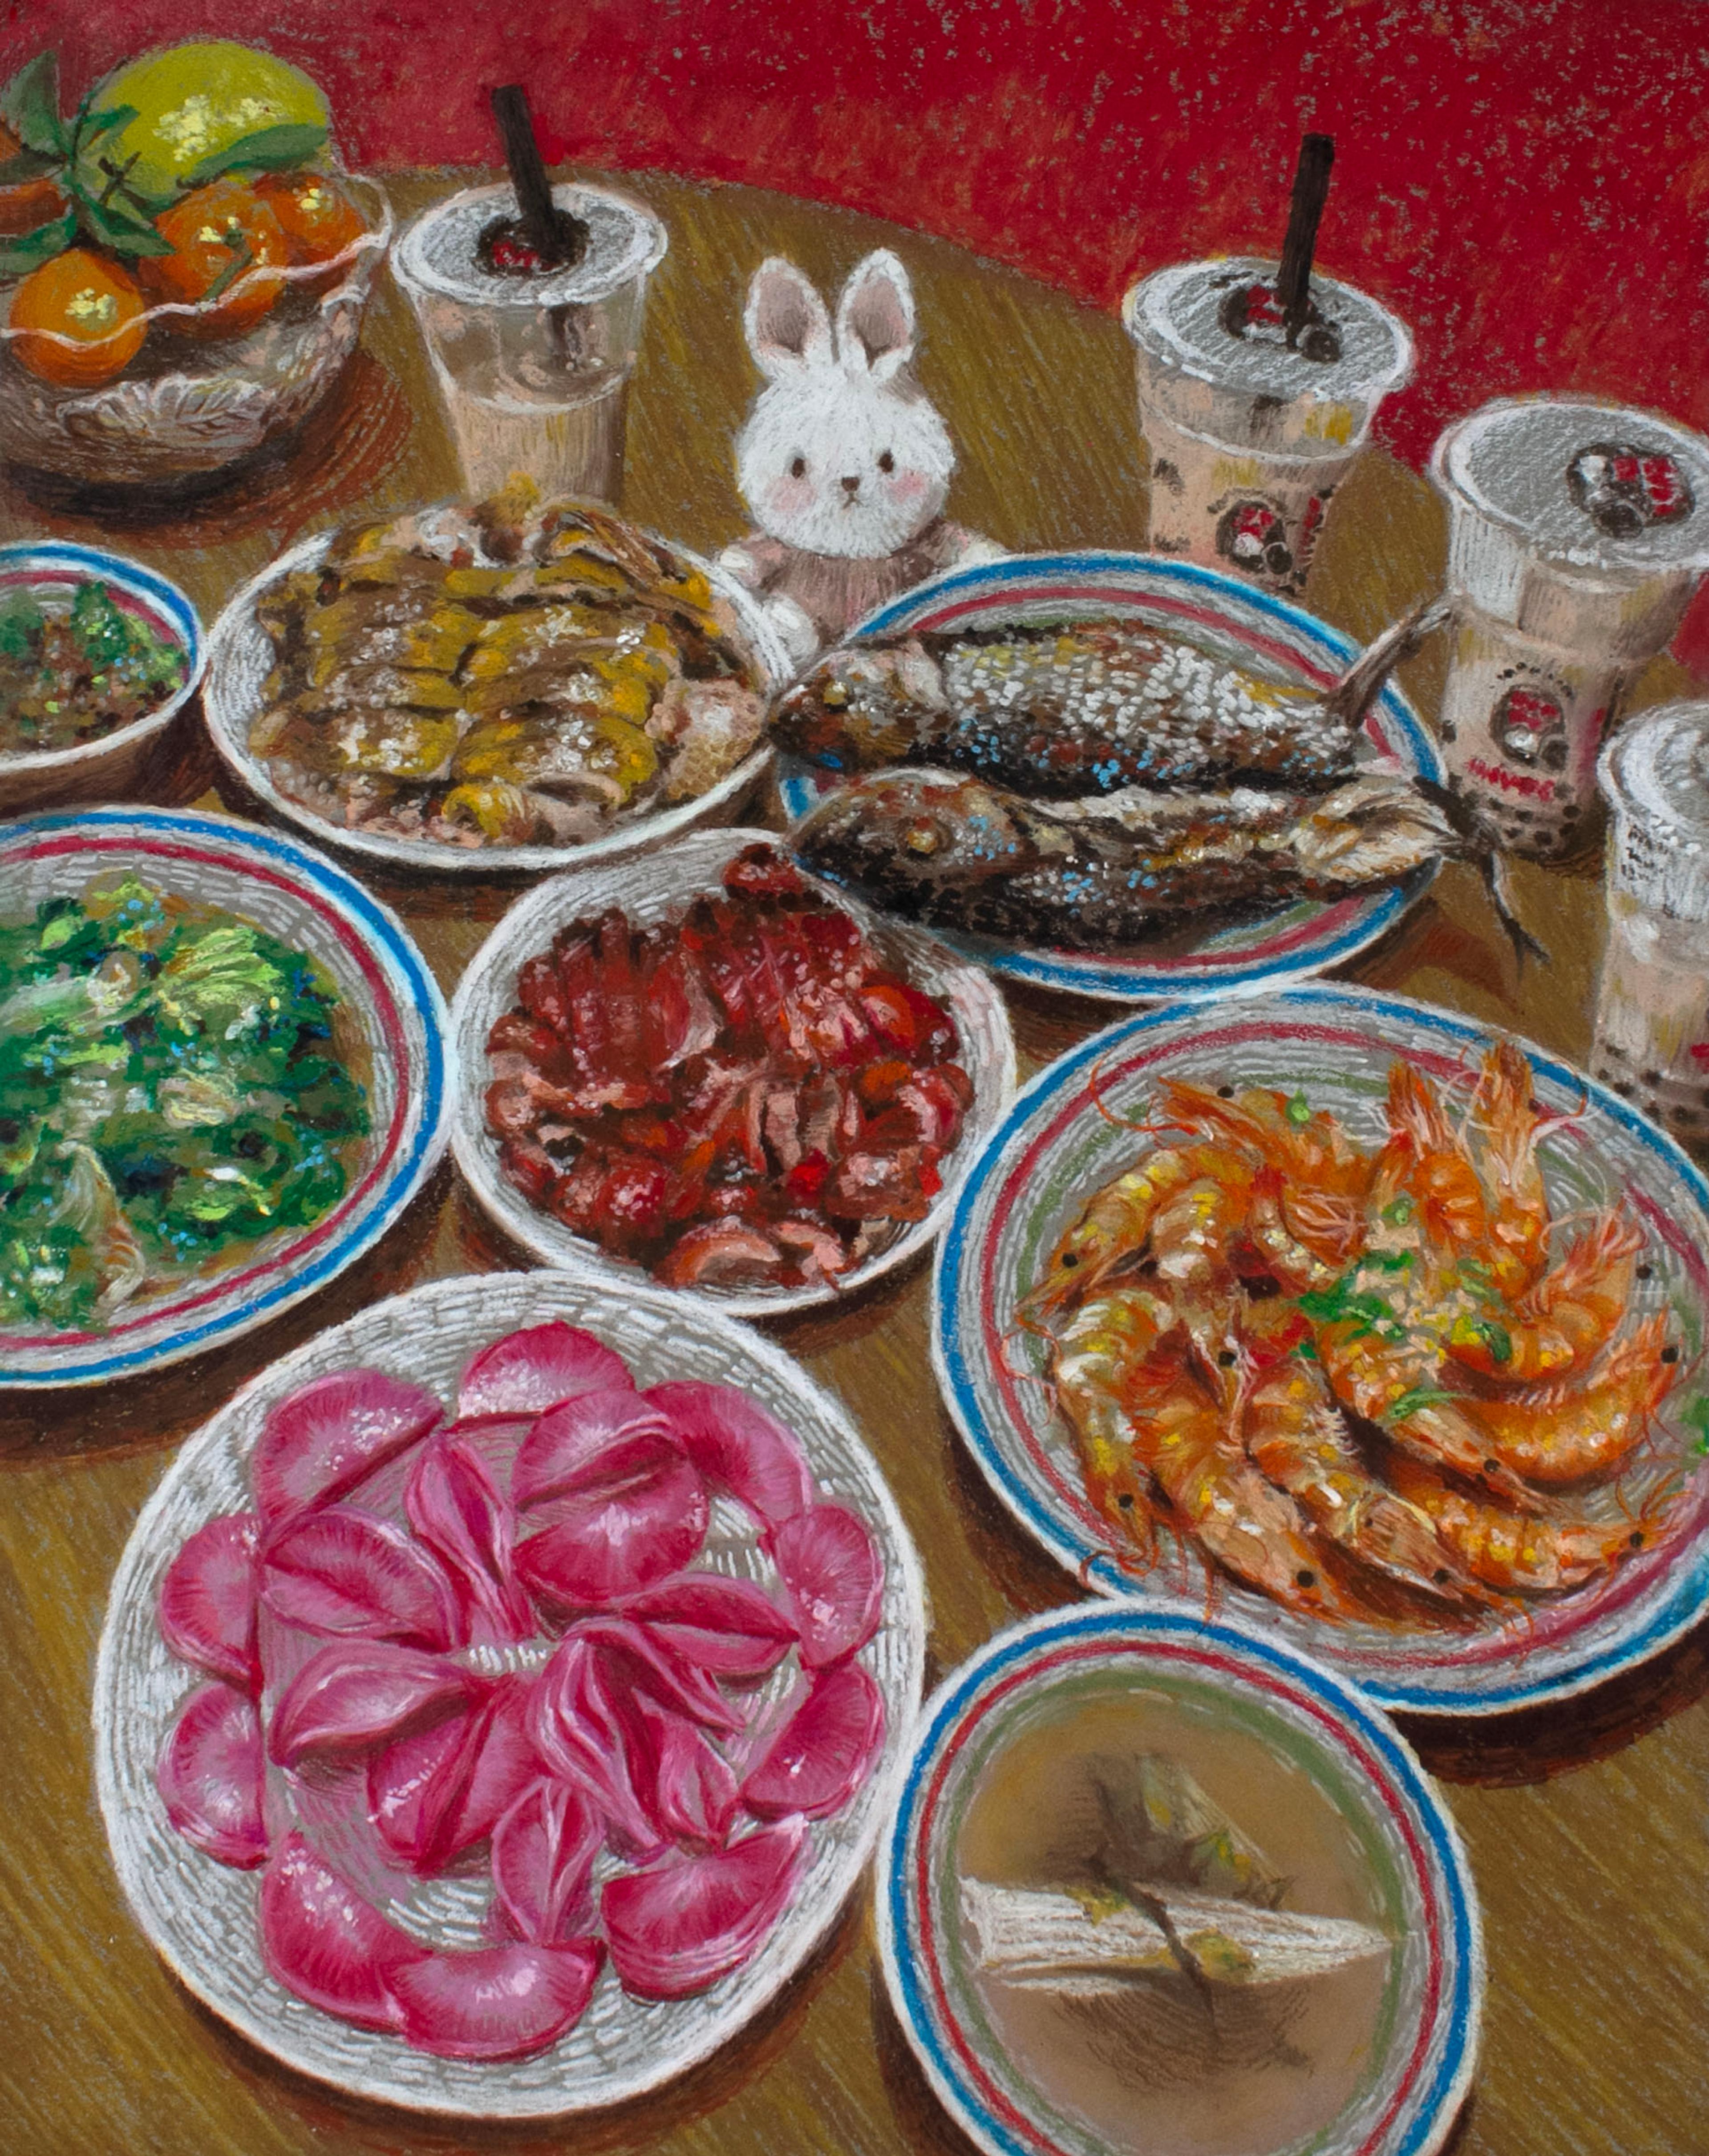 Oil pastel painting of a large assortment of various foods on plates sitting on a brown wooden tabletop. Among the dishes are dumplings, soup, shrimp, fish, spare ribs, broccoli, and several beverages with straws in plastic cups to the rear. A small, stuffed, white bunny rabbit sits on the table in the rear between the beverages. At the top left corner of the painting, a glass bowl filled with fruits sits at the very back of the table, in front of a red wall. The edge sof several of the plates are ringed with white, blue, red, and green concentric circles.